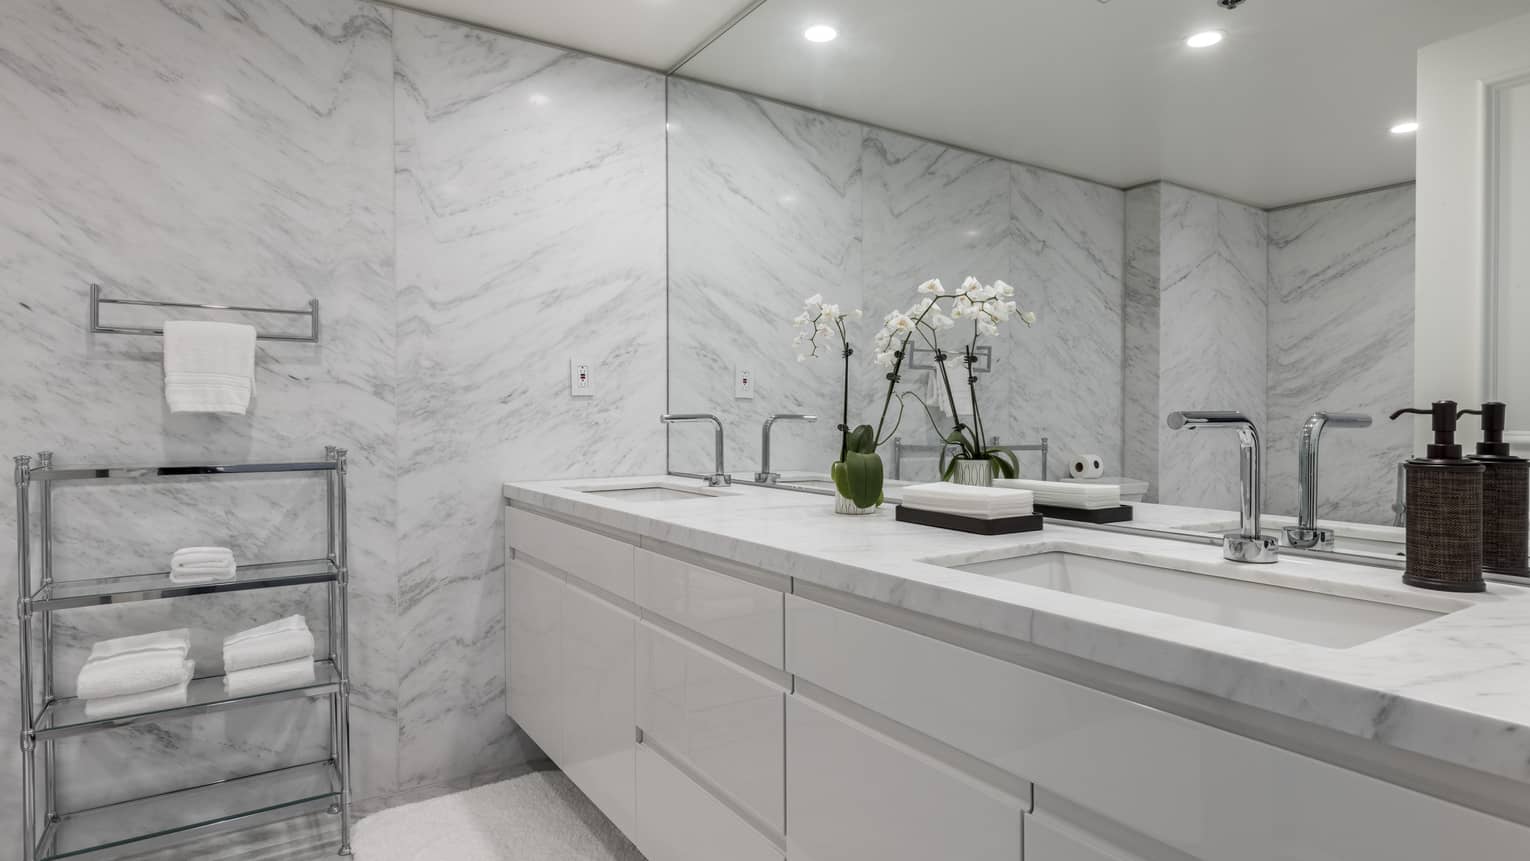 Bathroom with marble walls, white double vanity